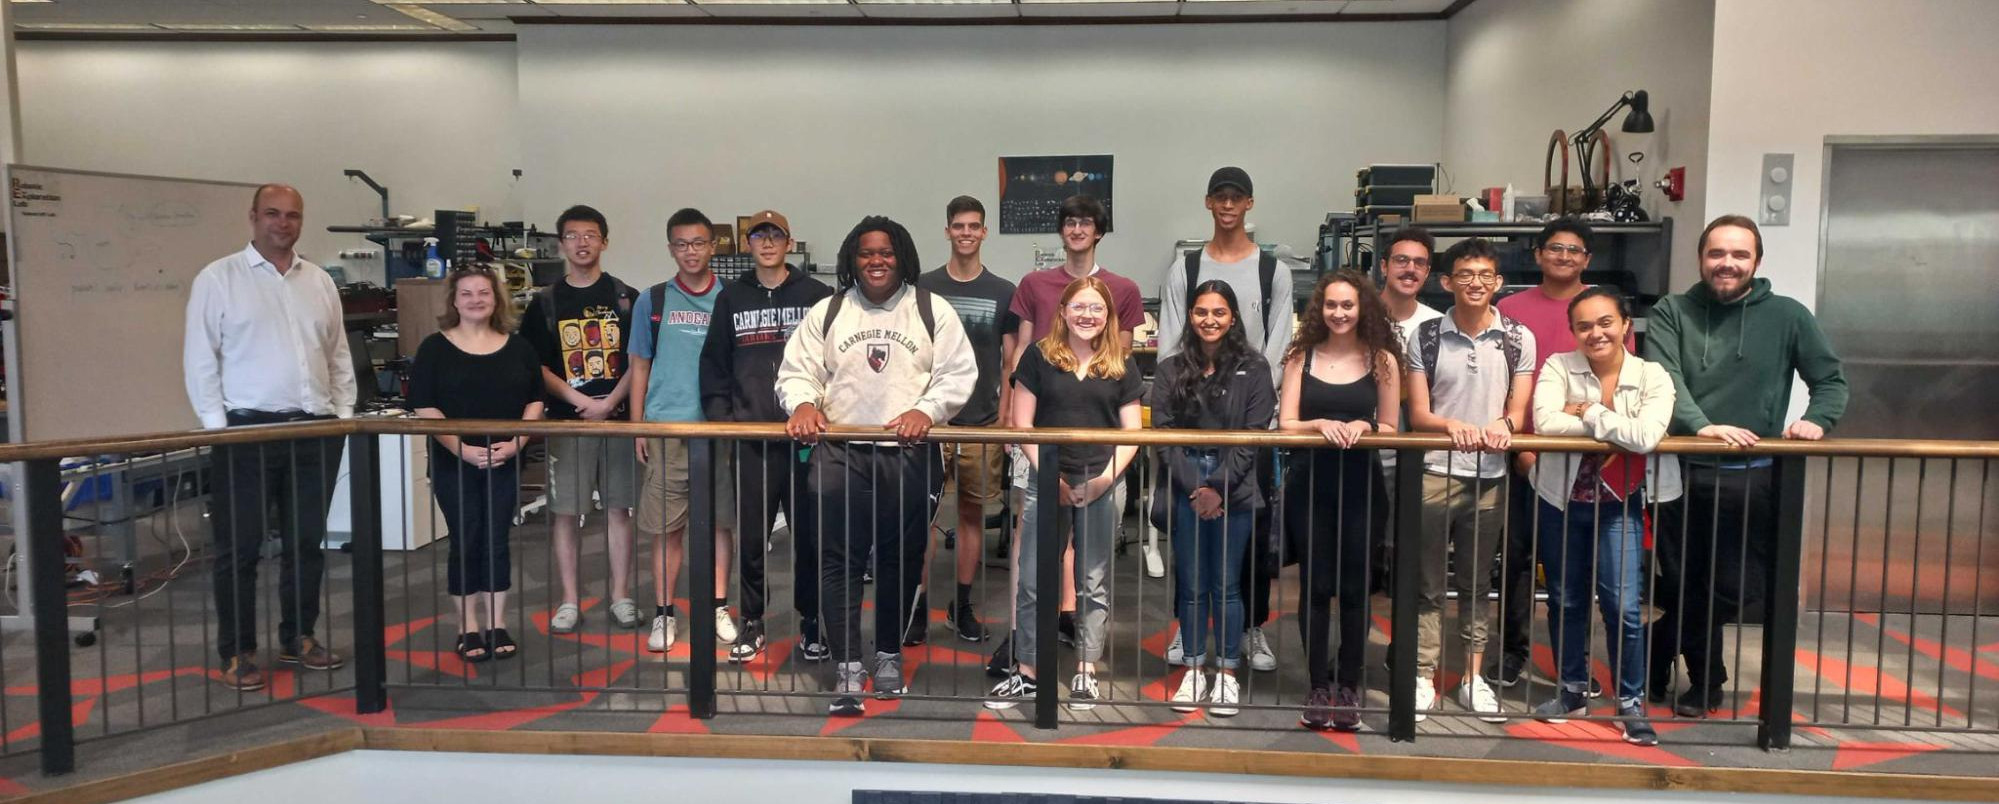 Fifteen students posed in a lab with the front row leaning over a wooden banister. The head researcher and the program director are positioned the furthest left in the grouping. Lab equipment is partially visible behind the group.